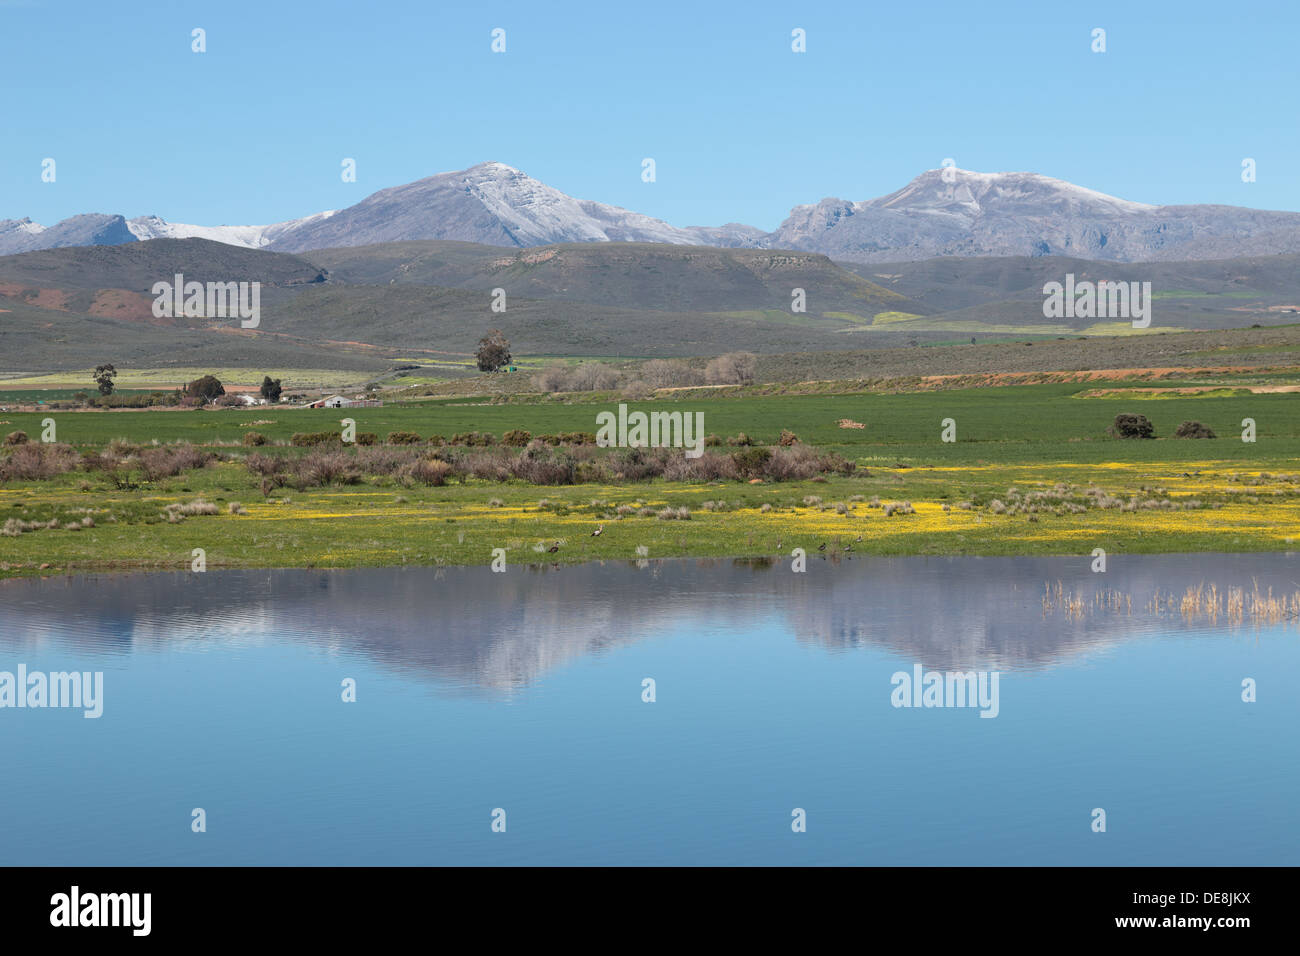 Spring flowers and seasonal lake with snow capped peaks of Matroosberg mountains in the background Stock Photo